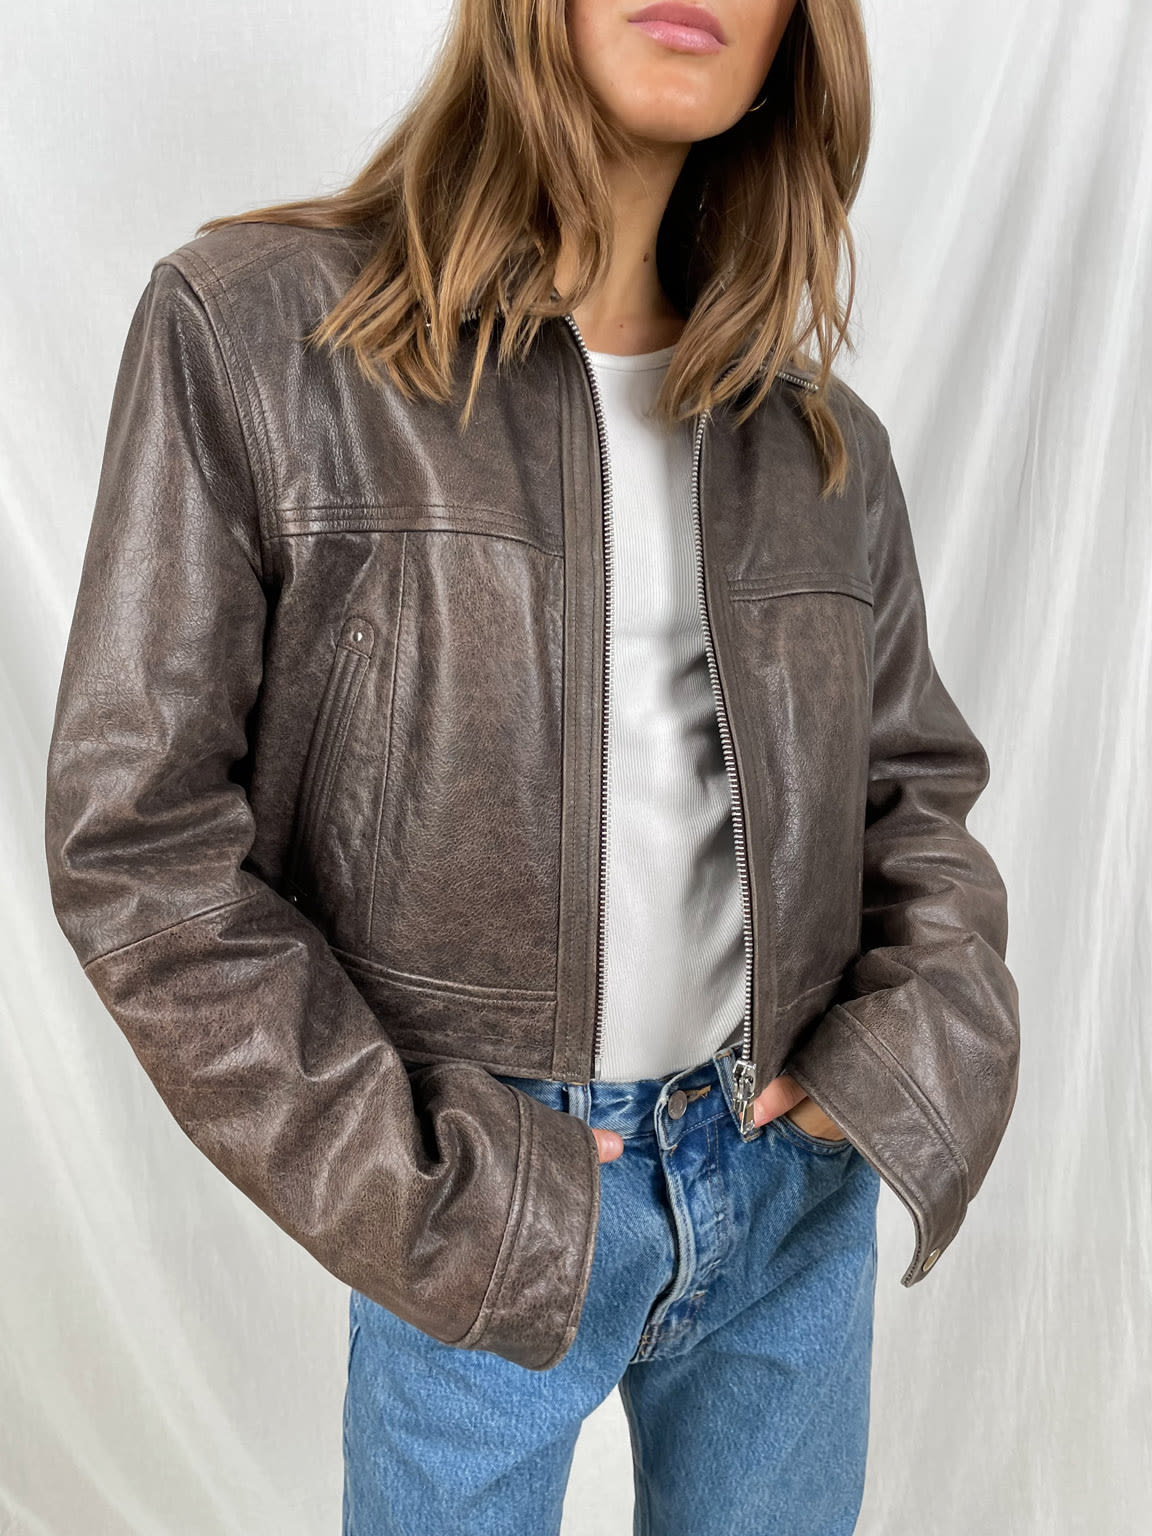 LYLE LEATHER JACKET - BROWN